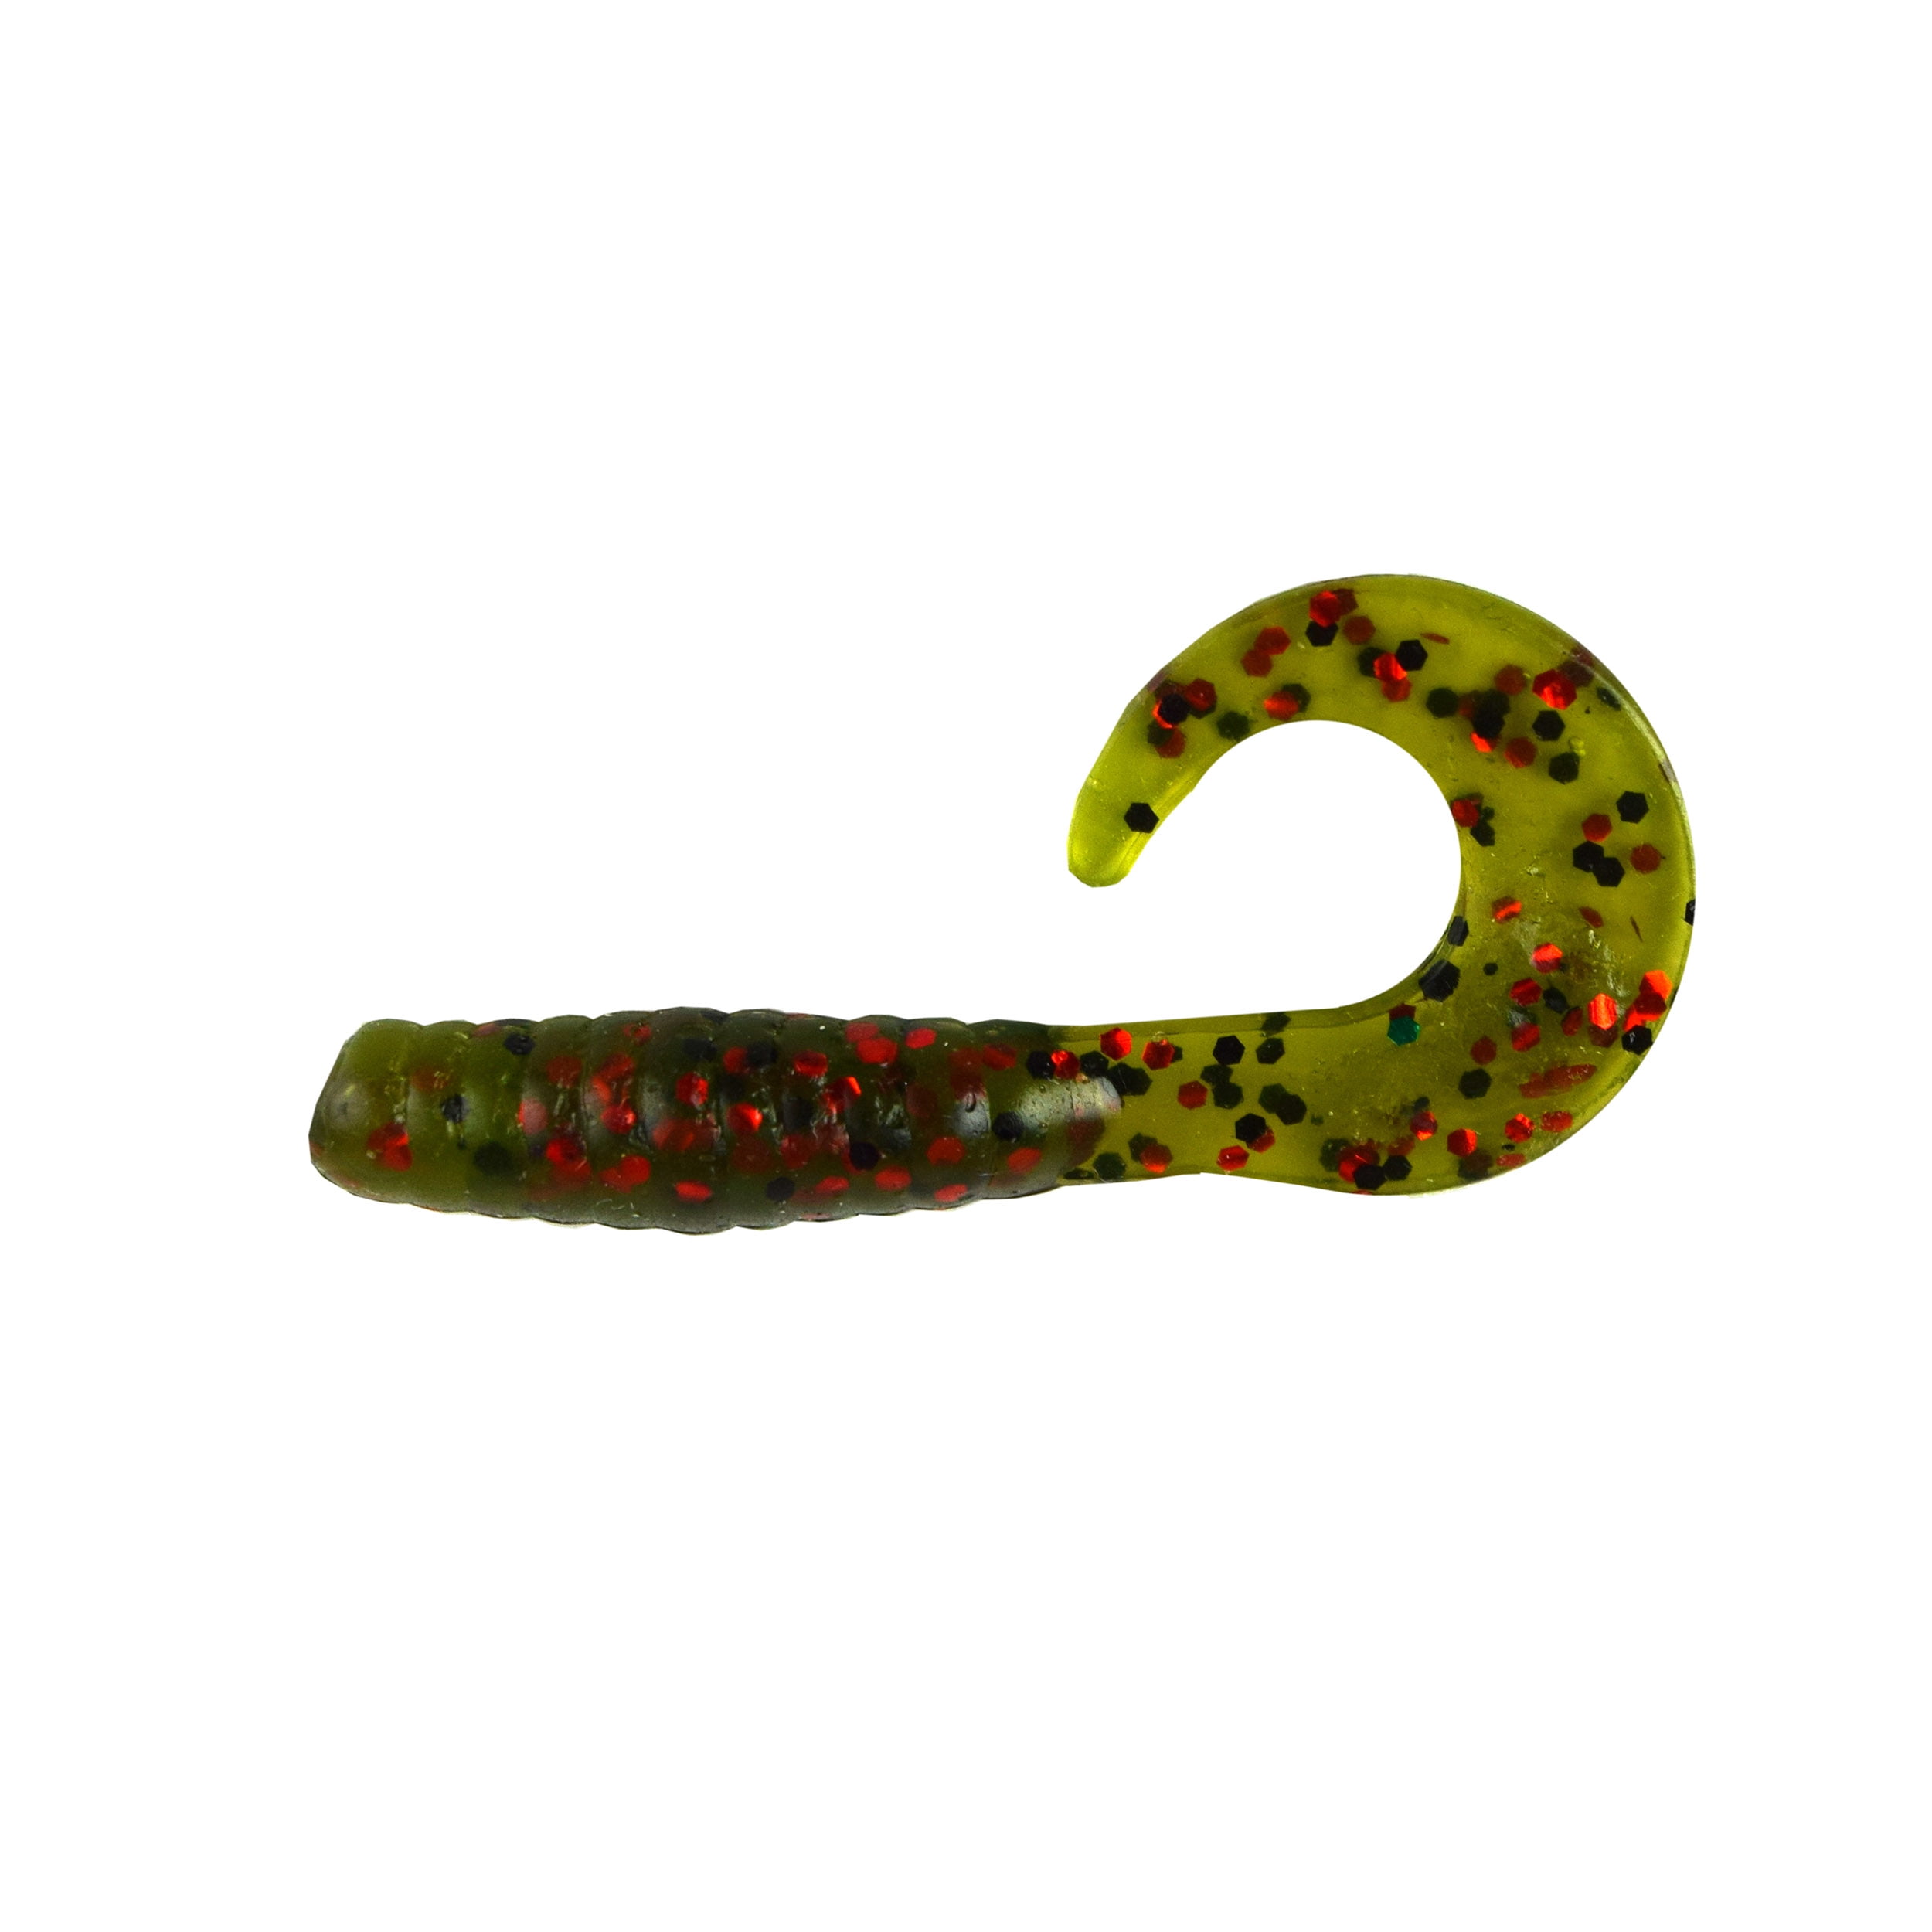 Tackle HD 26-Pack Grub Fishing Lures, 3-Inch Curl Tail Grub, Bulk Fishing  Grubs for Crappie, Bass, Walleye, or Trout Bait, Freshwater or Saltwater